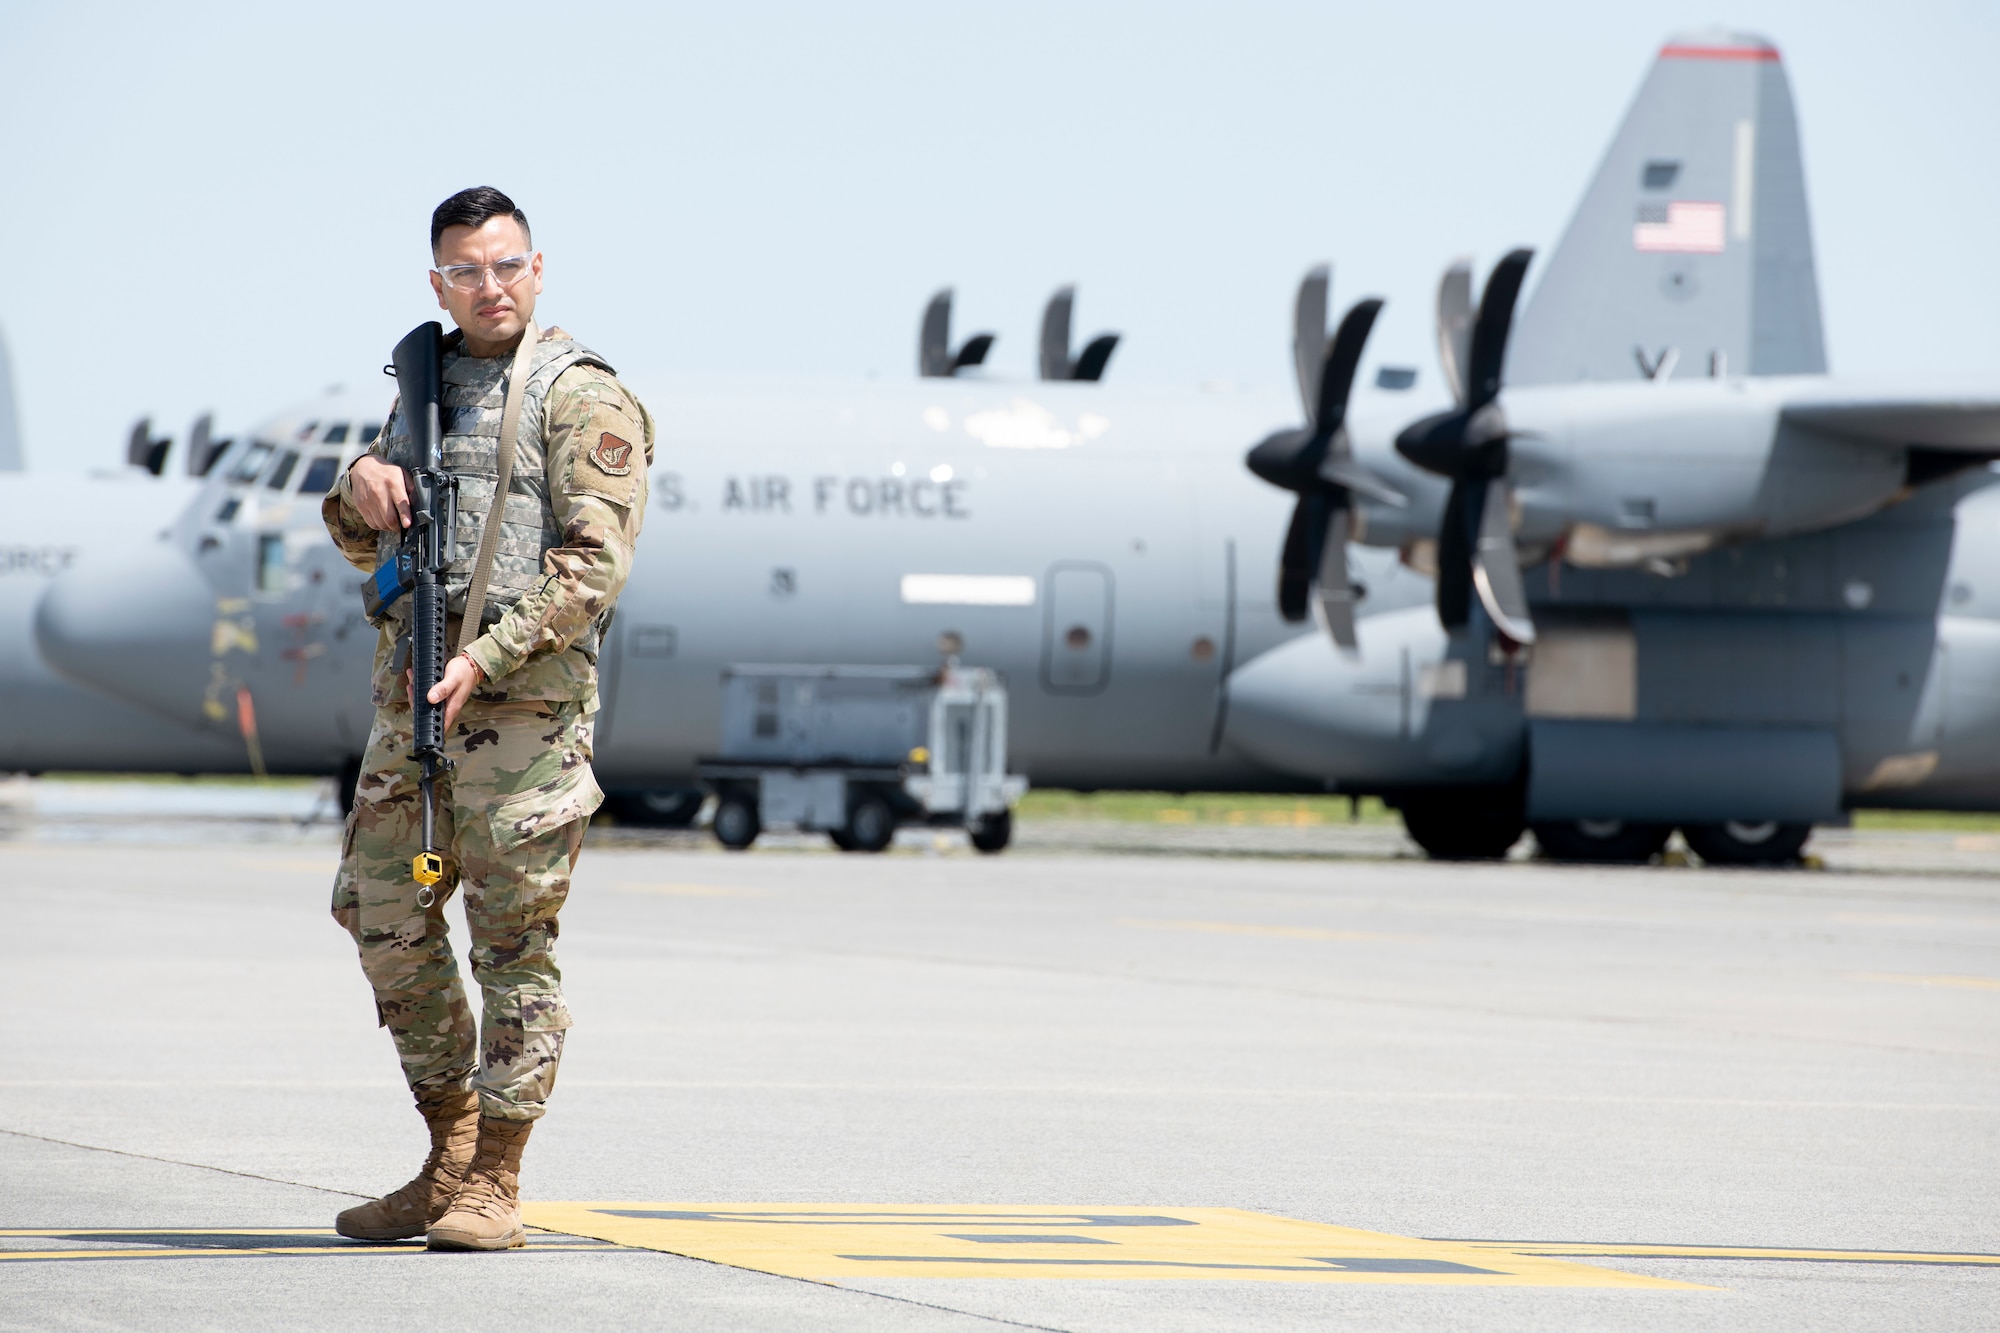 Senior Airman Raymundo Valero Delgado, 374th Comptroller Squadron financial operations technician, stands ready to defend a C-130J Super Hercules during the fly-away security training at Yokota Air Base, Japan, May 10, 2022. The 374th Security Forces Squadron conducted fly-away security training as part of a training during the exercise week. This training assessed Yokota's ability to perform Agile Combat Employment across a range of military operations in a complex and dynamic international security environment. (U.S. Air Force photo by Machiko Arita)